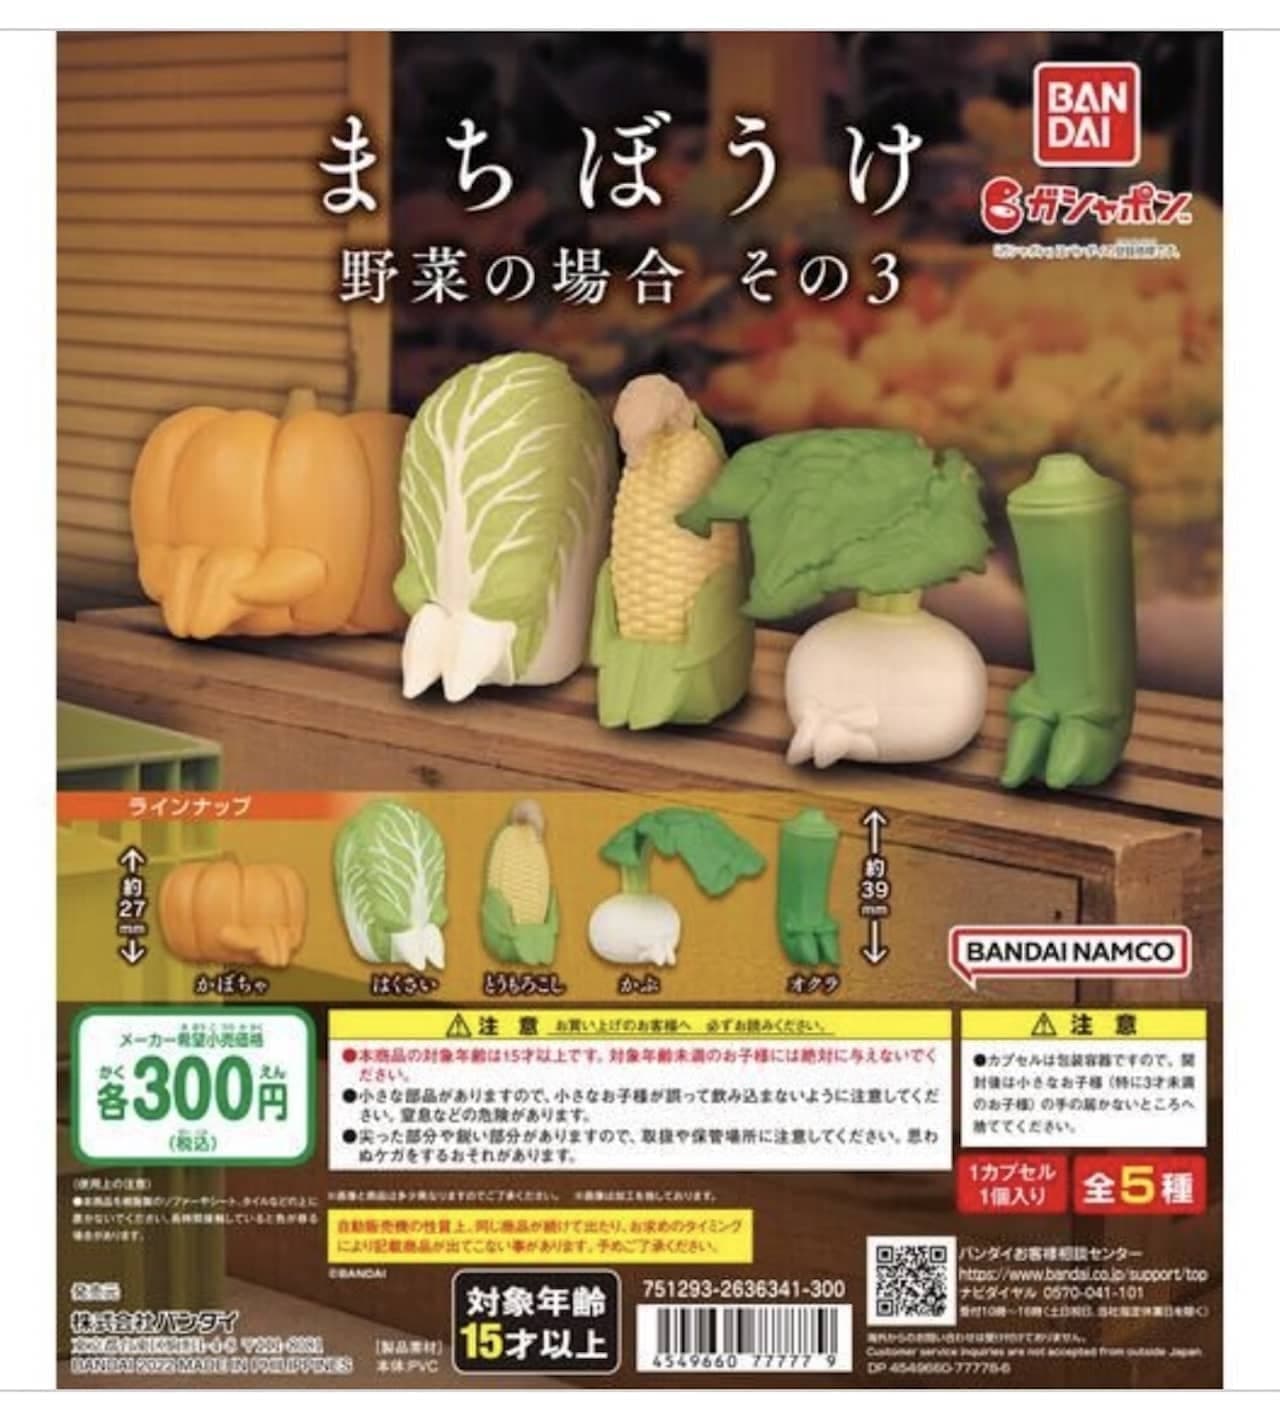 Machiboke: The Case of the Vegetables, Part 3" by Capsule Toys